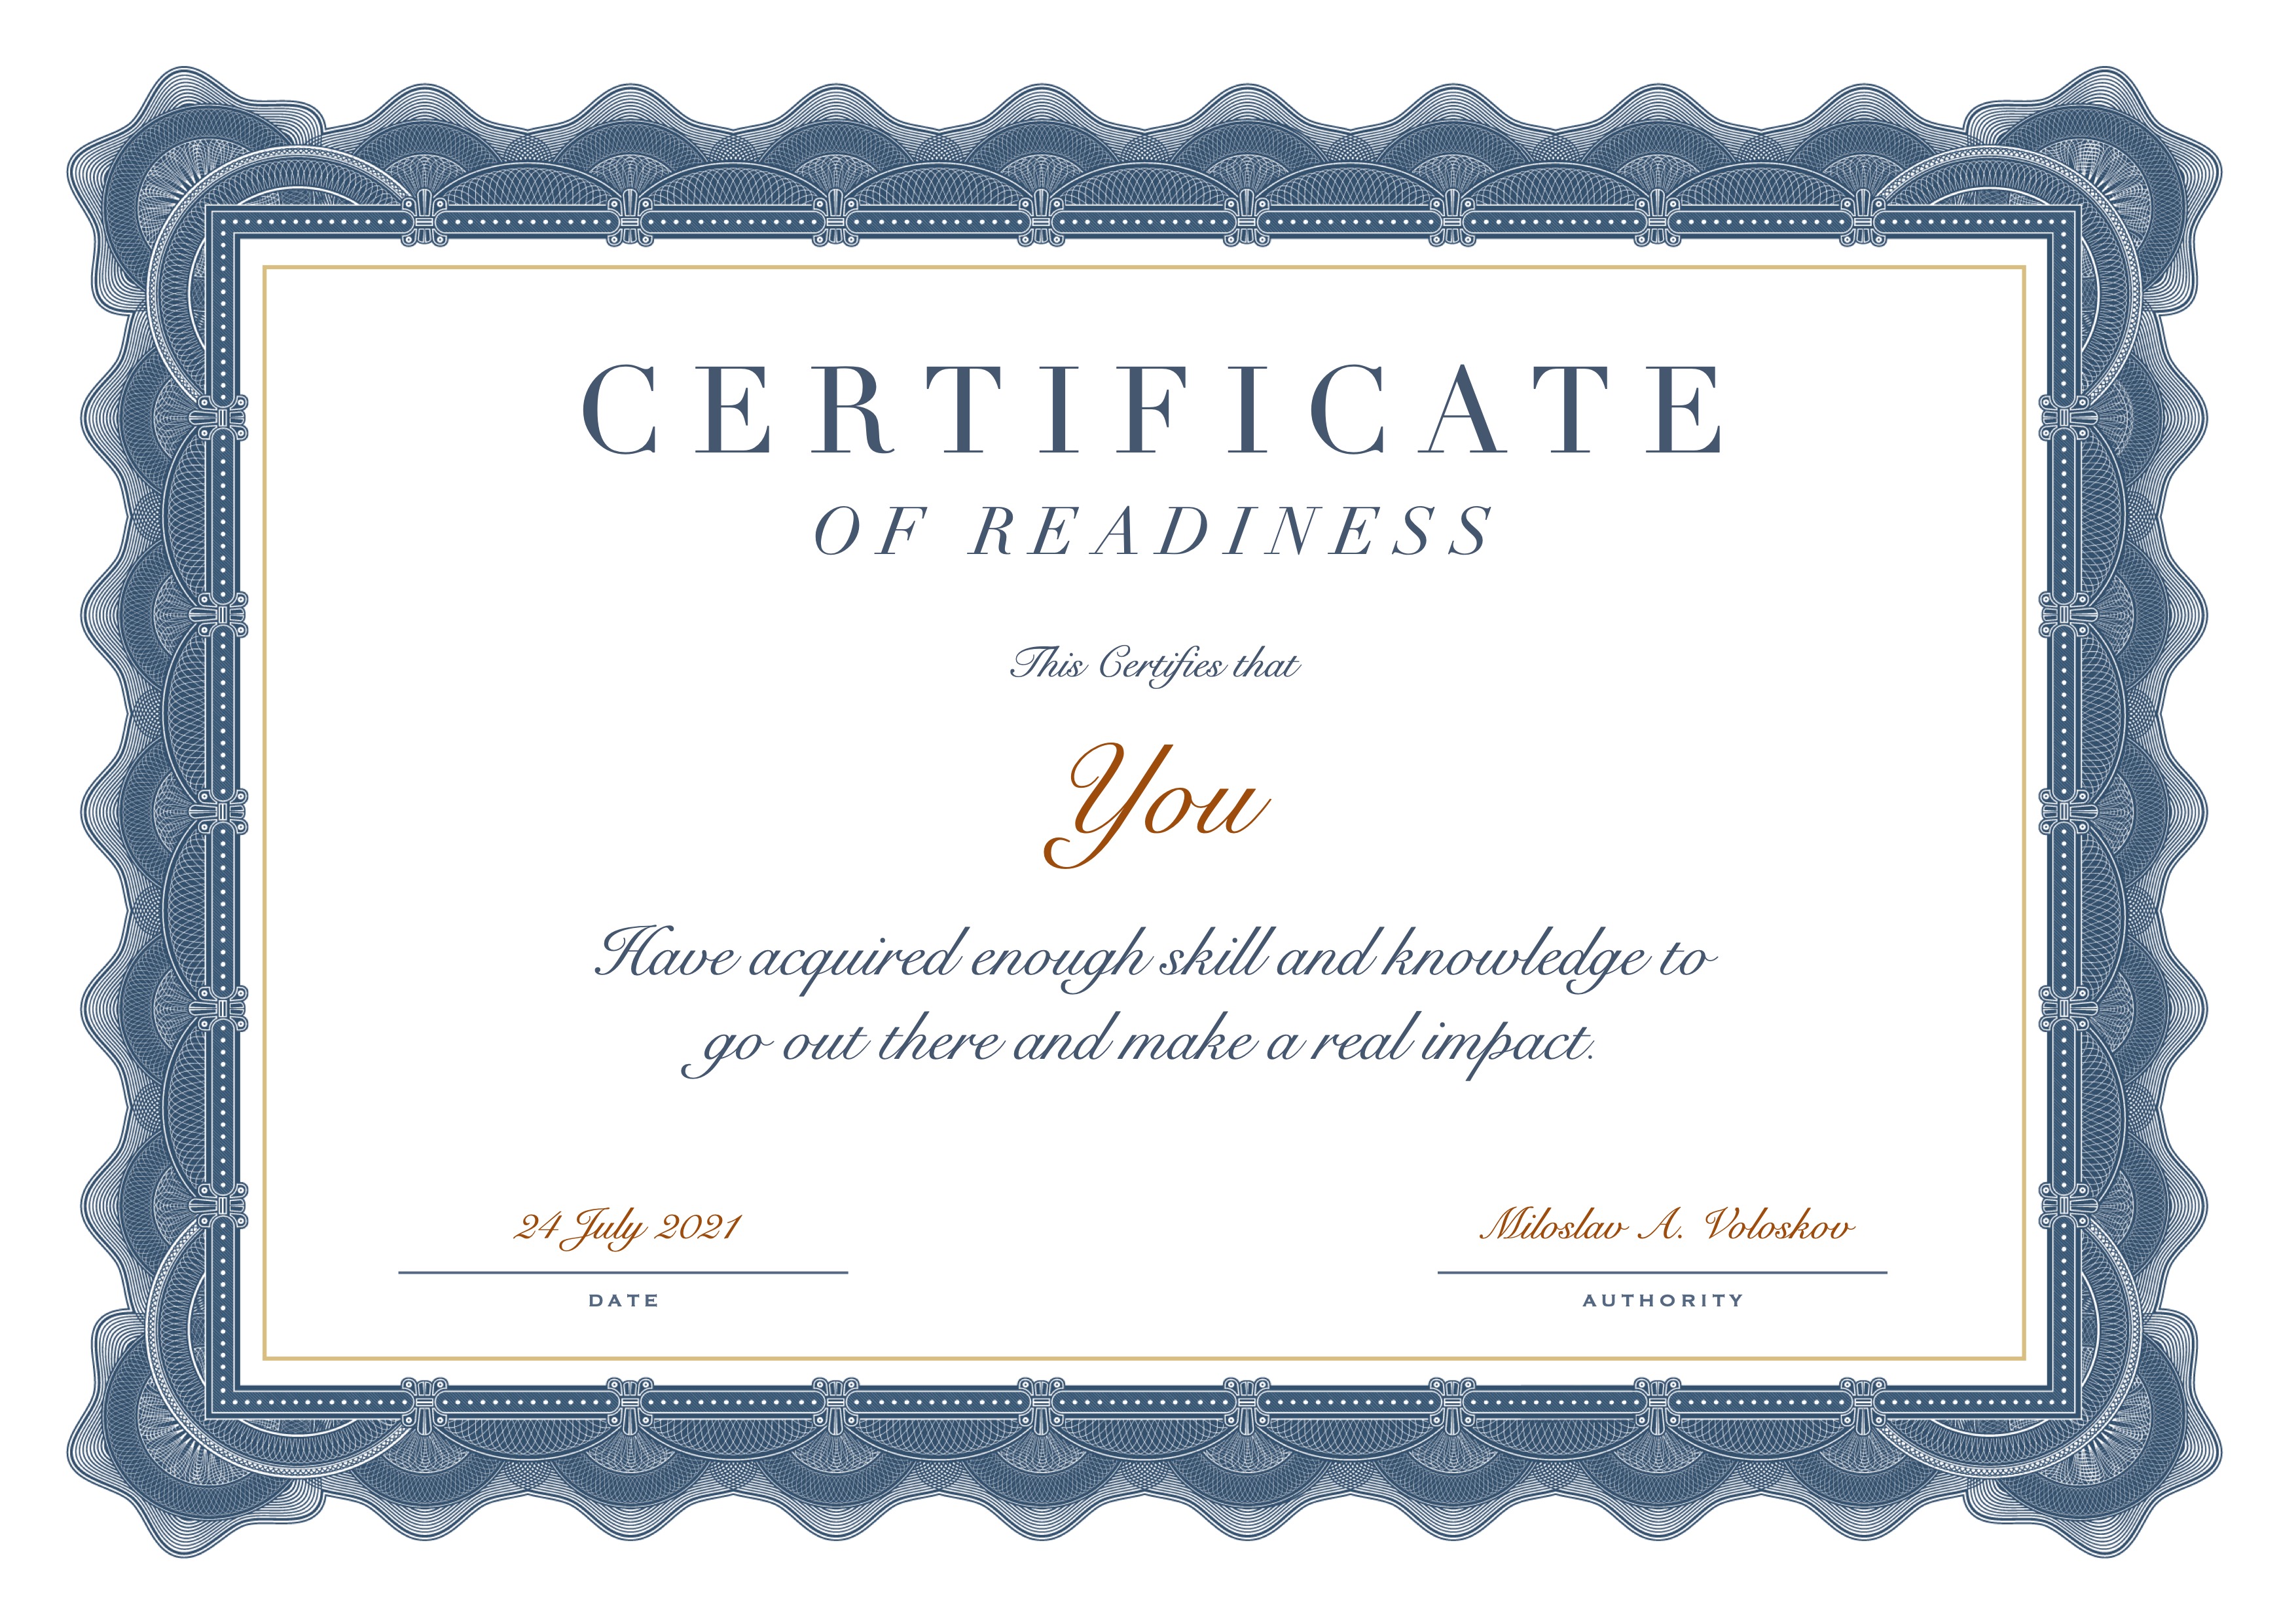 Certificate that you're ready to start making impact